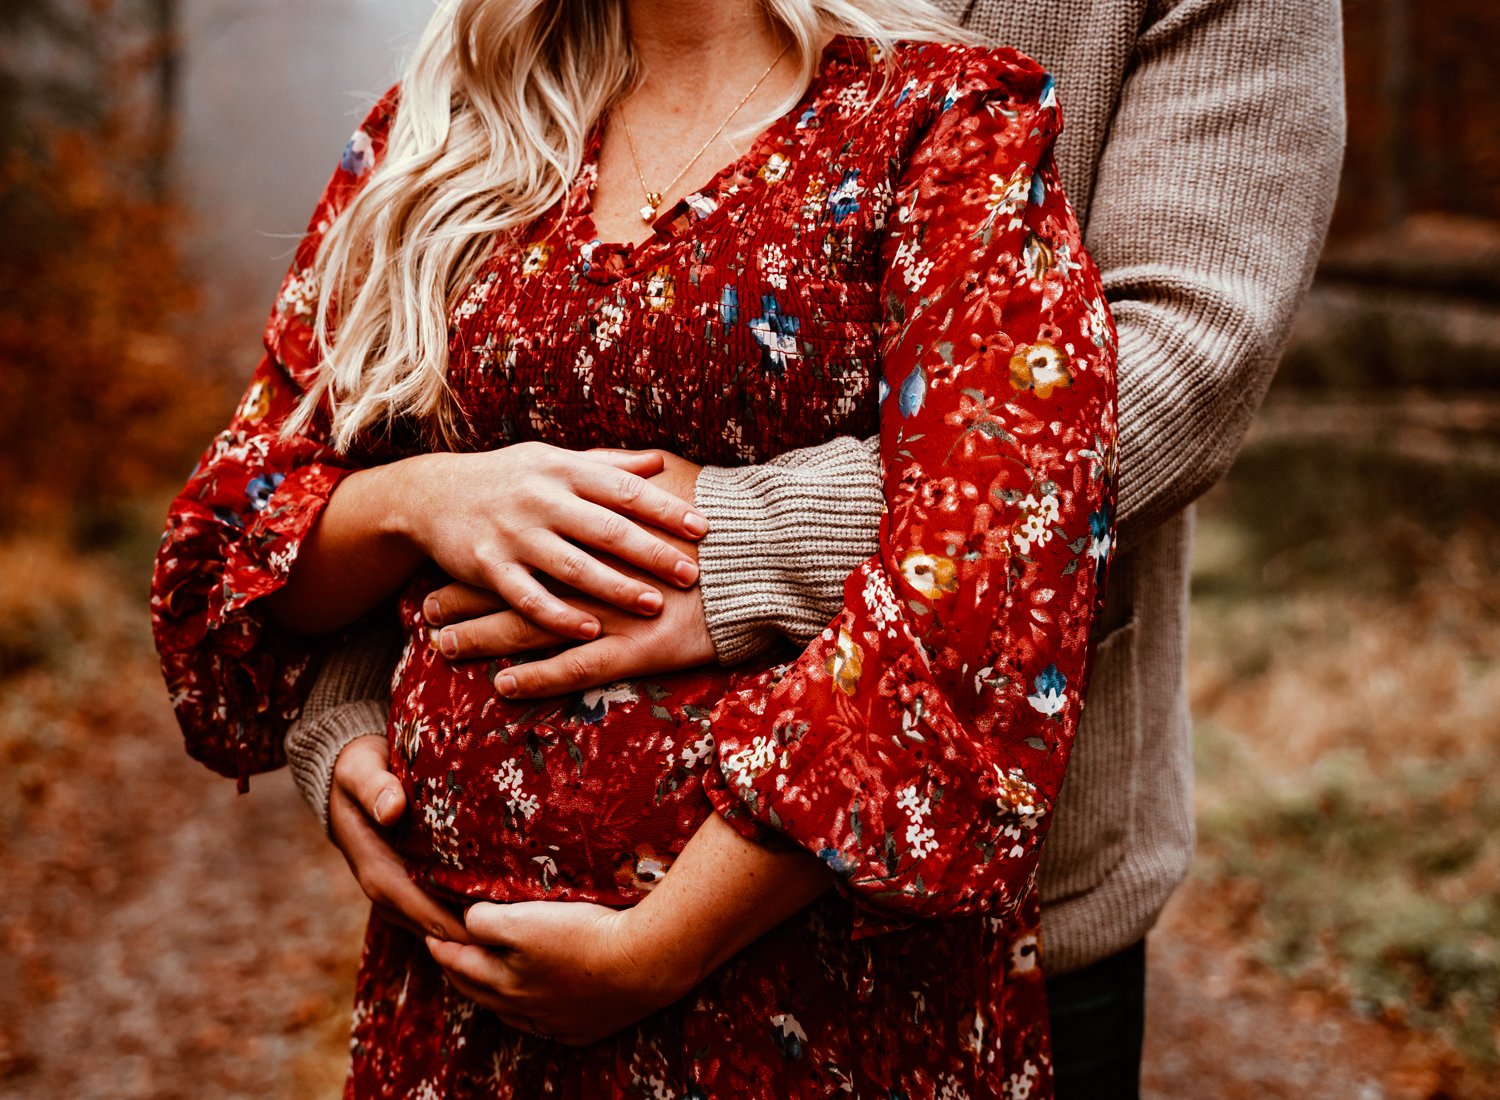 moody-maternity-couple-session-in-fall-season-in-wooded-forest-in-germany-by-motherhood-photographer-sarah-havens-ramtein (2).jpg